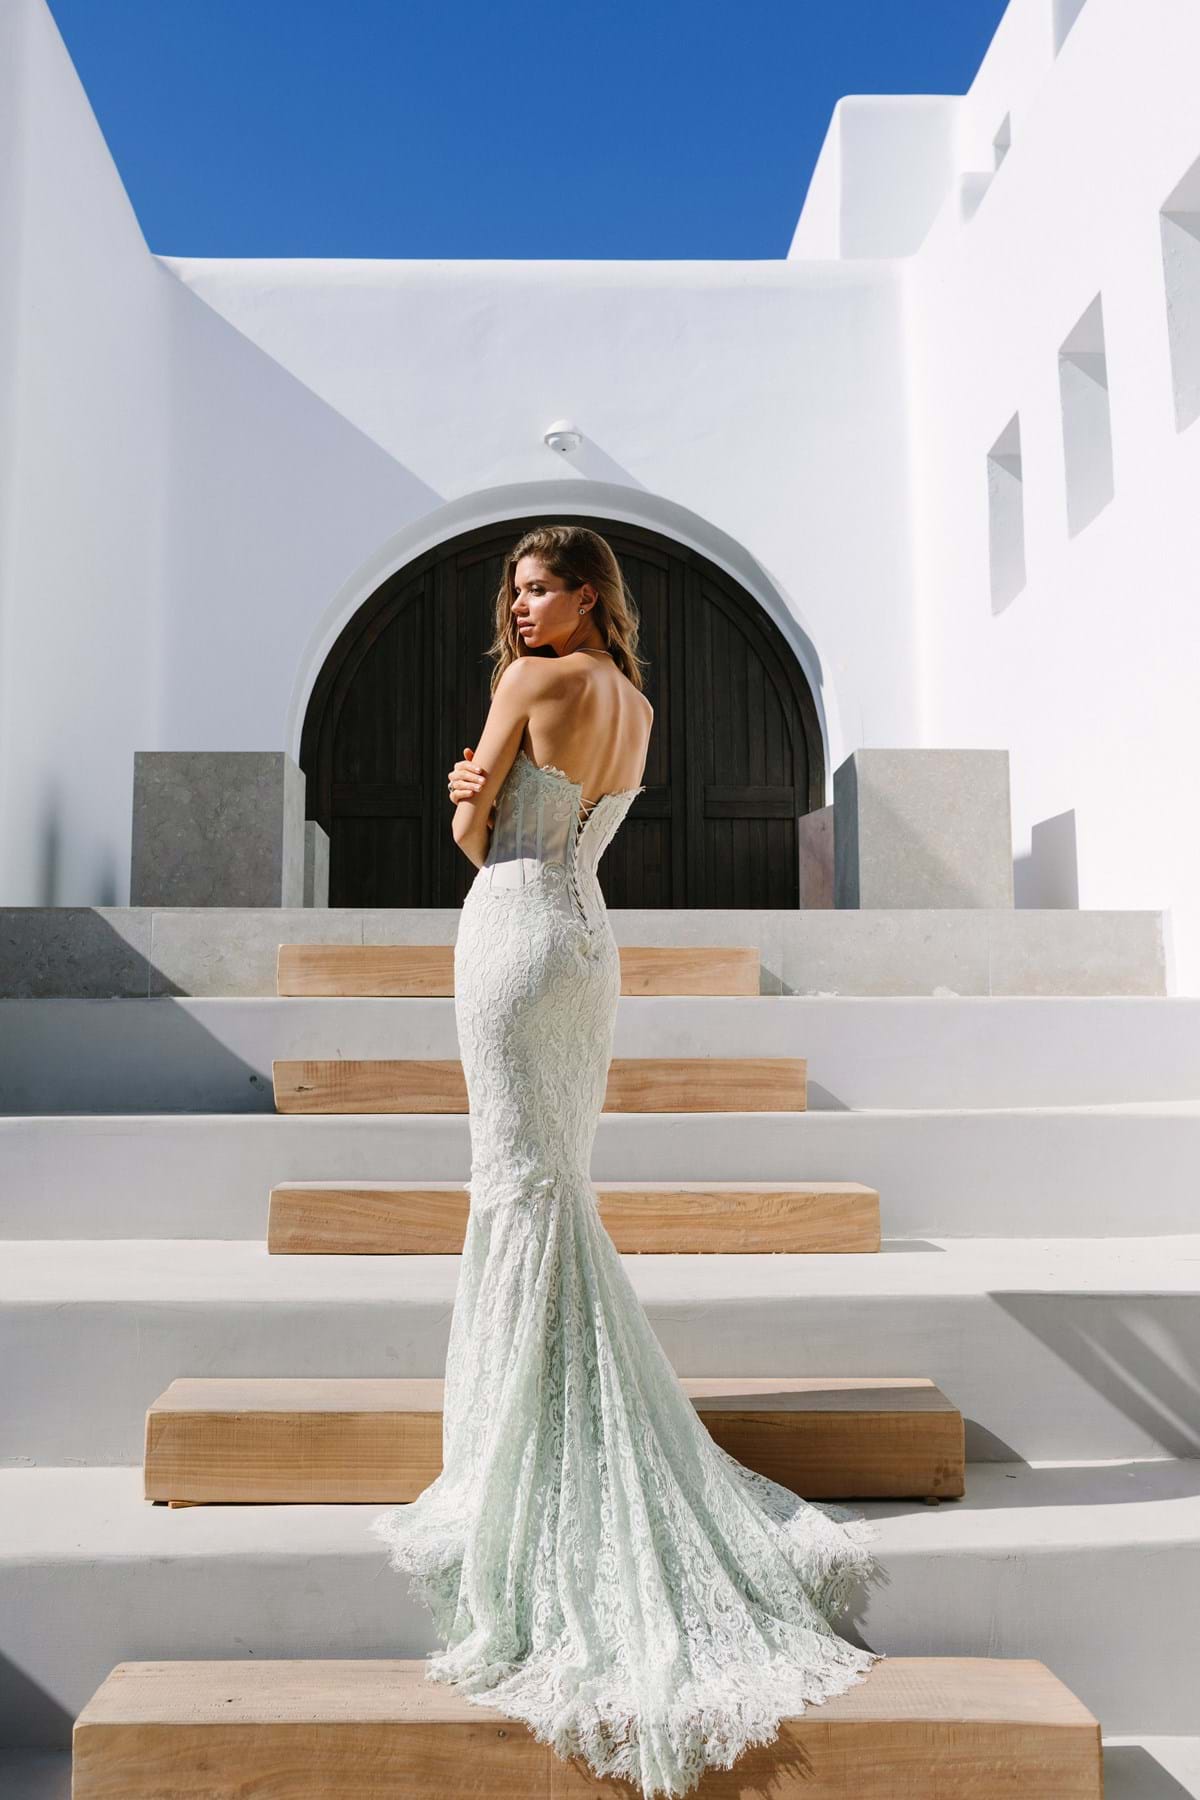 Couture Fashion for a Greece Destination Wedding or Event